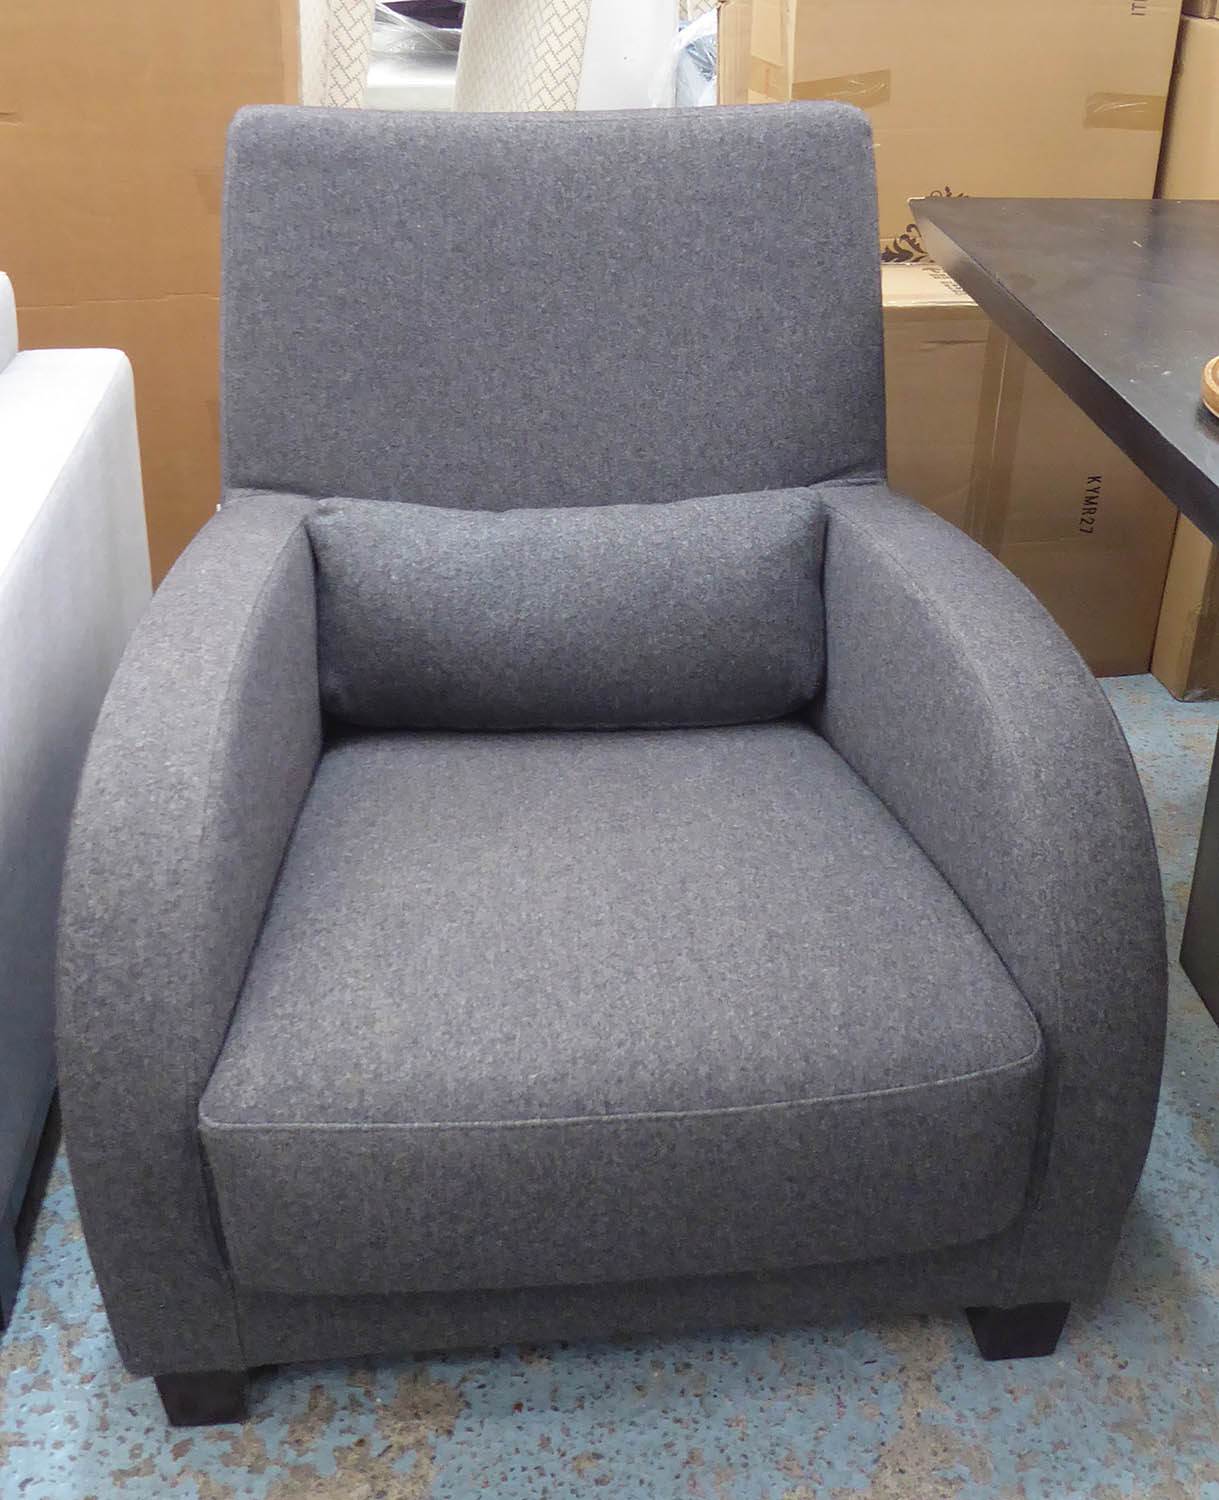 LIGNE ROSET JONATHAN ARMCHAIR, with charcoal grey upholstery, 78cm W x 89cm H.